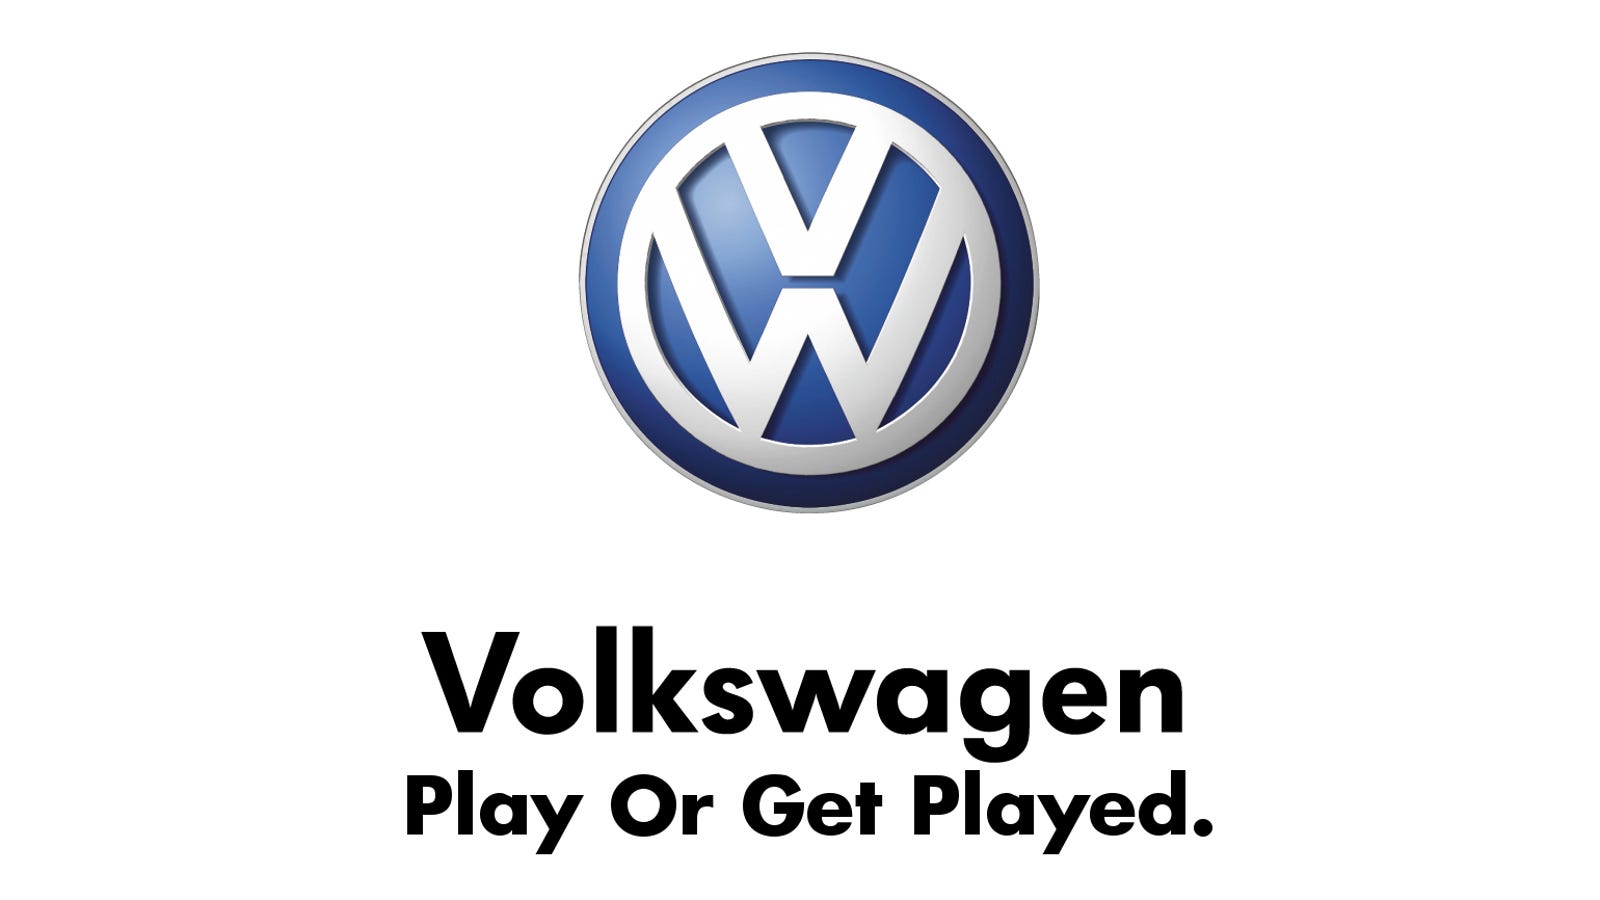 What Should Volkswagen's New Slogan Be Now That They Killed 'Das Auto'?